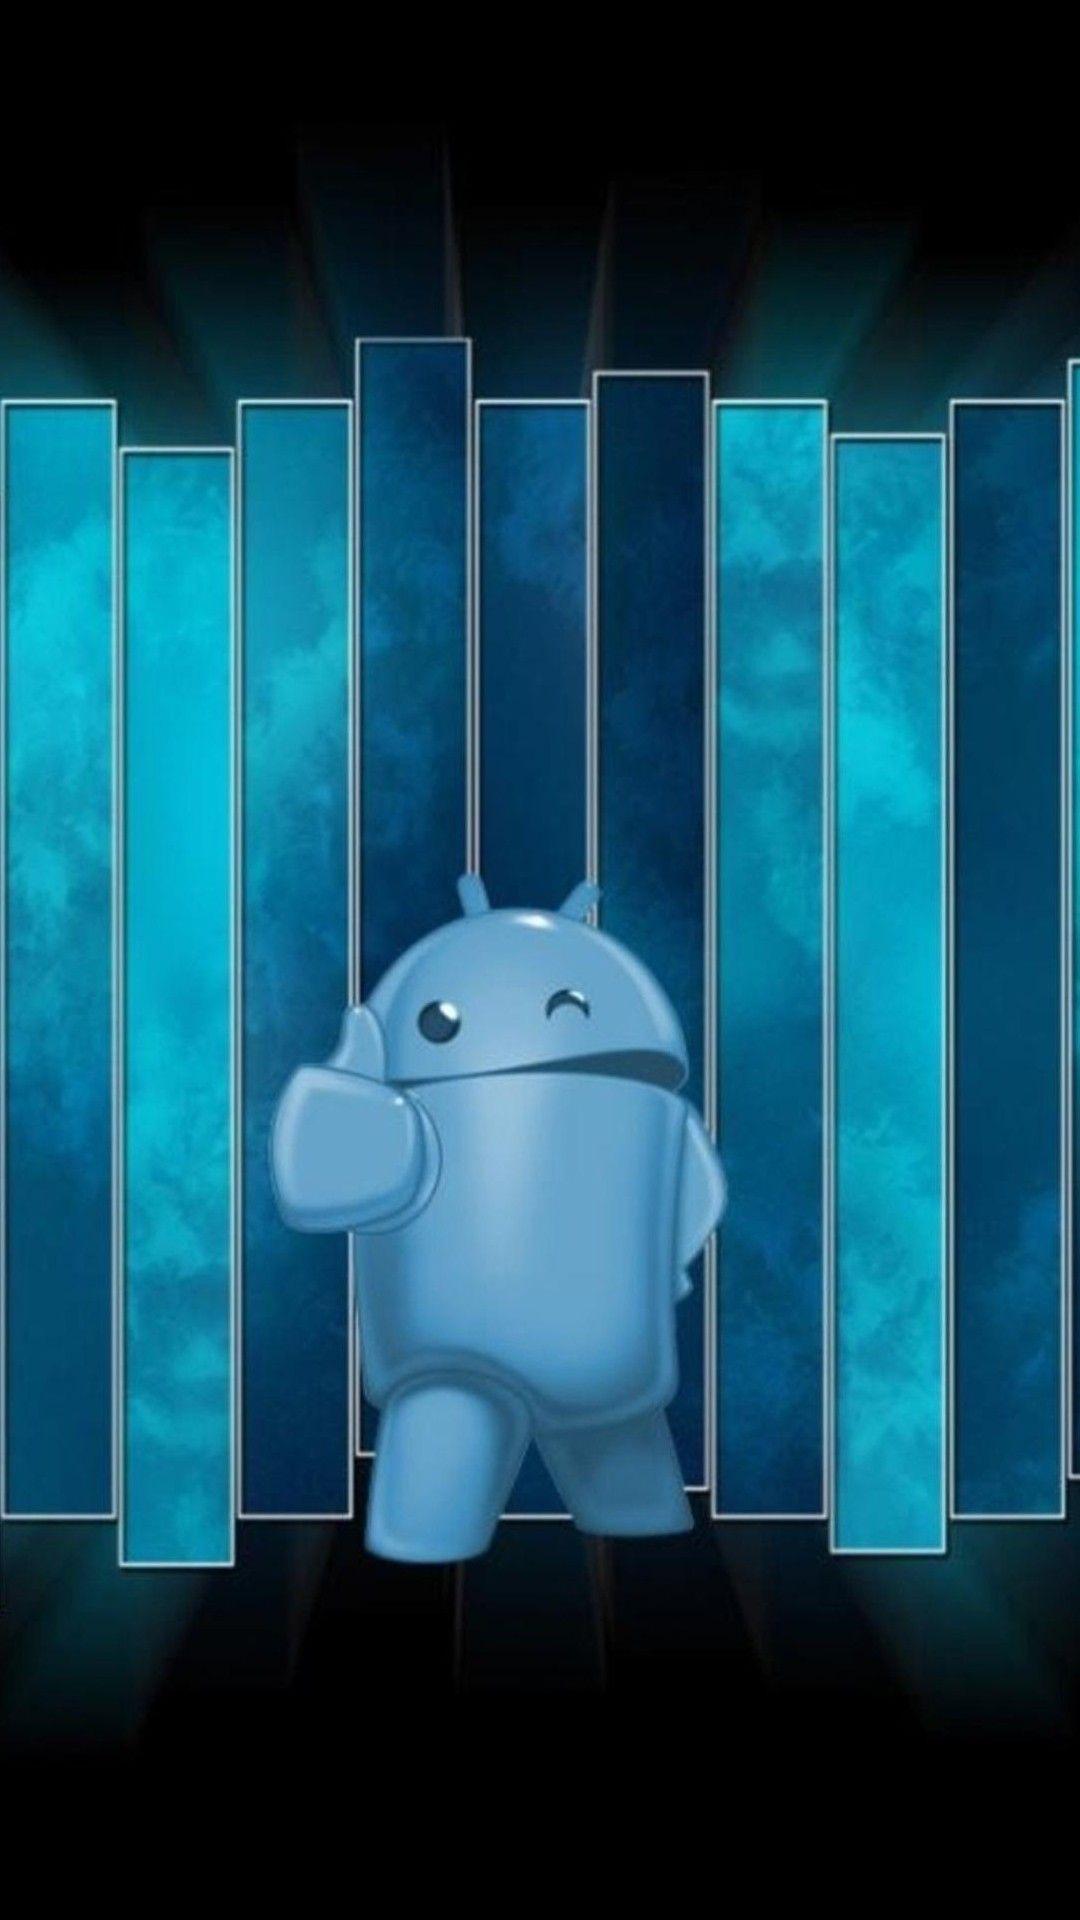 Android Thumbs Up Blue Smartphone Wallpaper HD ⋆ GetPhotos